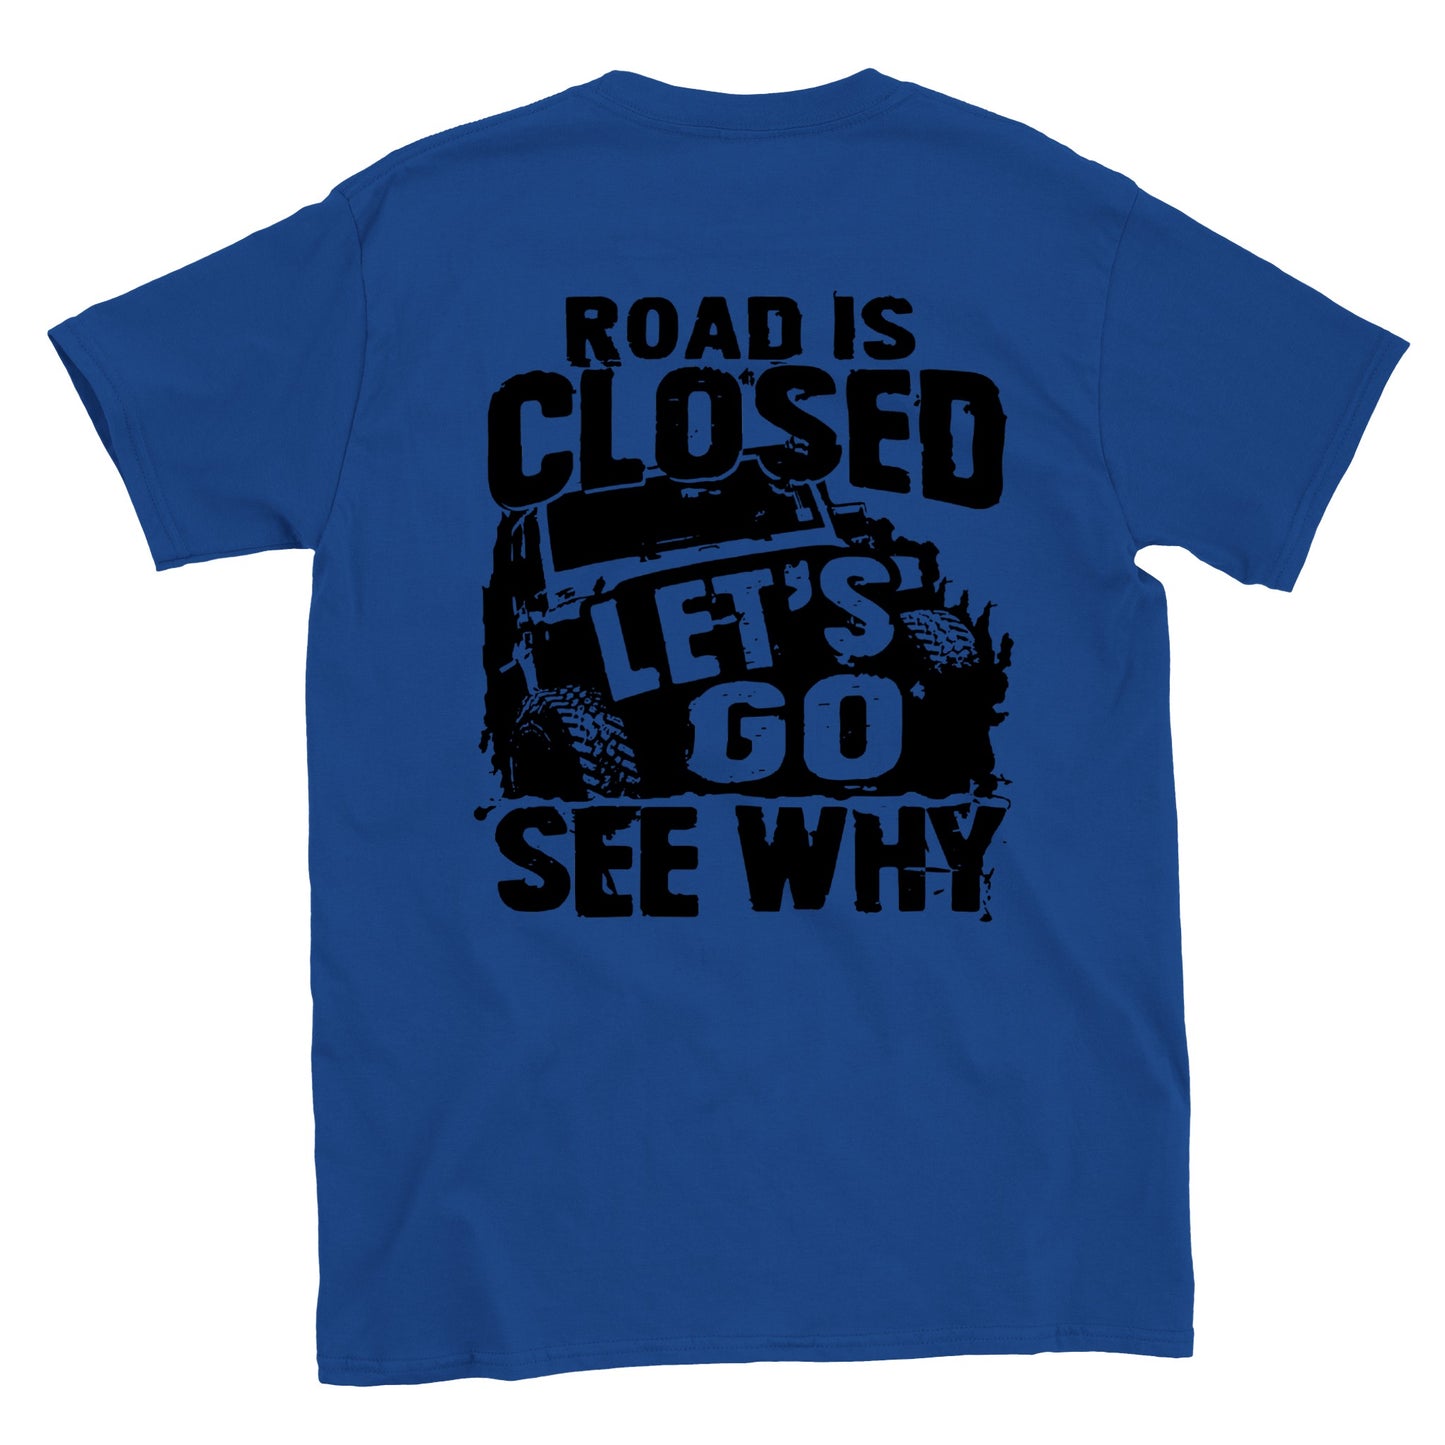 Road Closed - Let's Go See Why - Off Road - Back Print - Crewneck T-shirt - Mister Snarky's